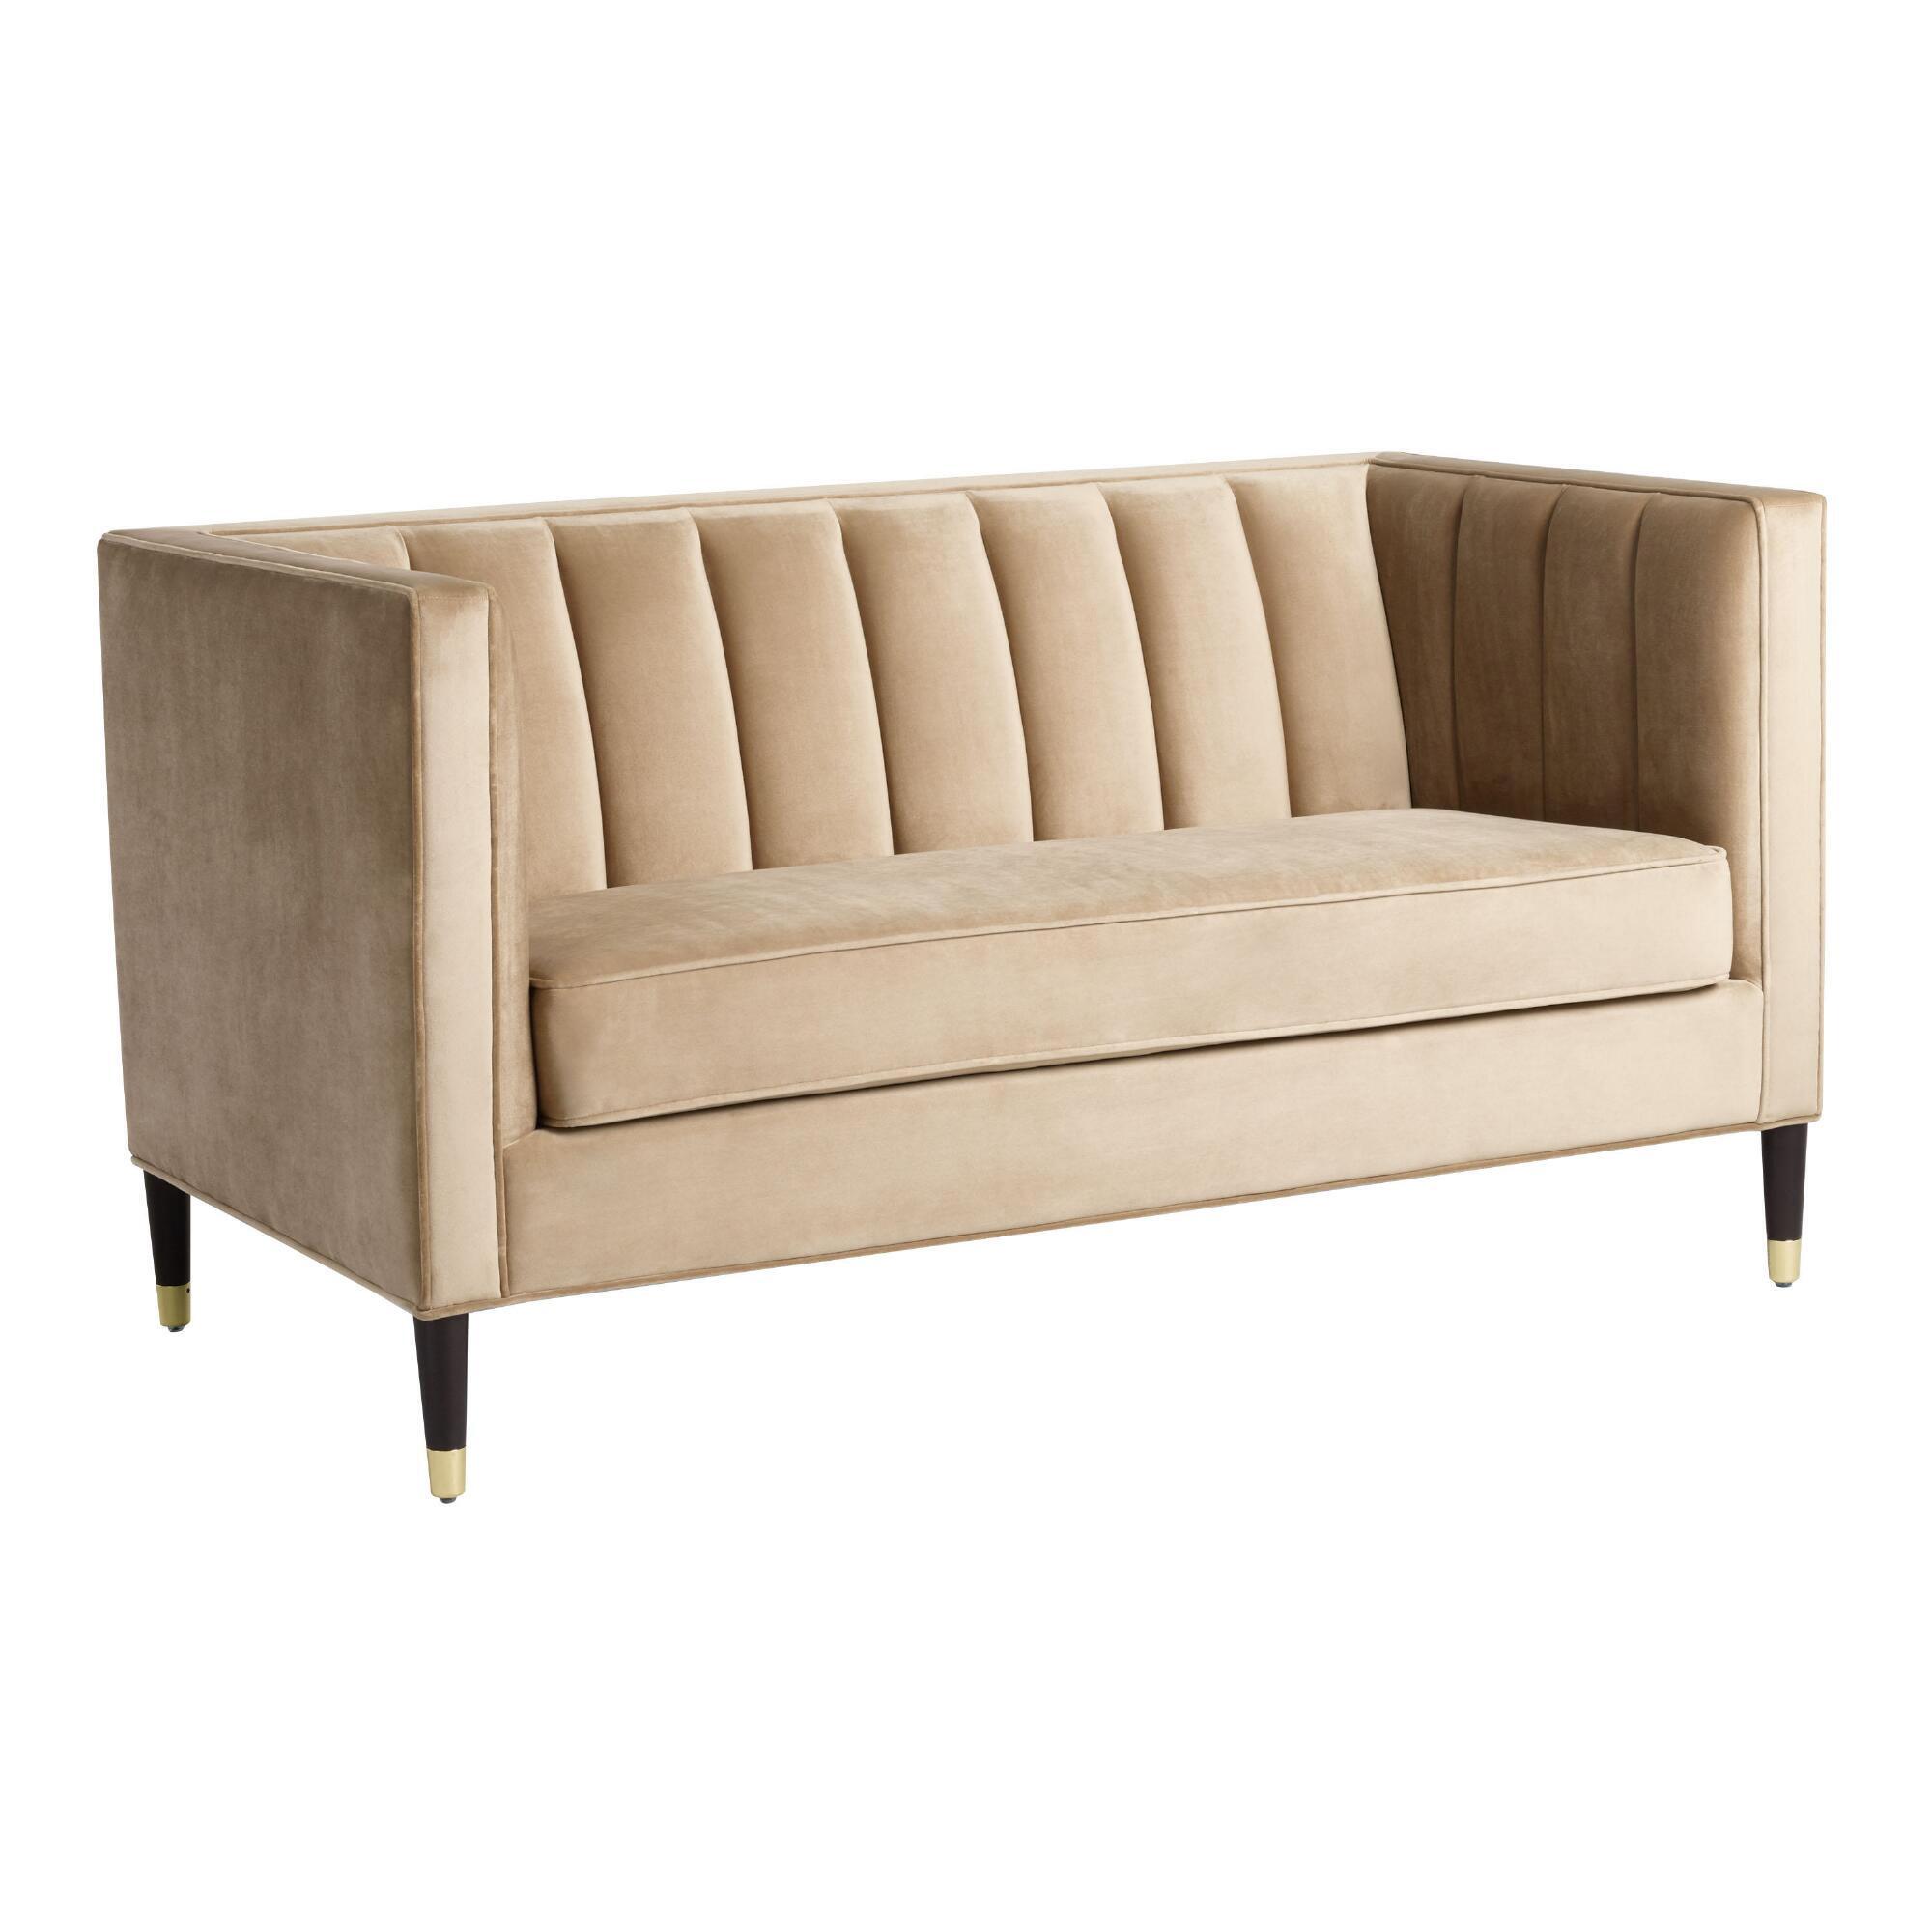 Leanna Tufted Loveseat: Brown/Natural/Gold - Fabric by World Market